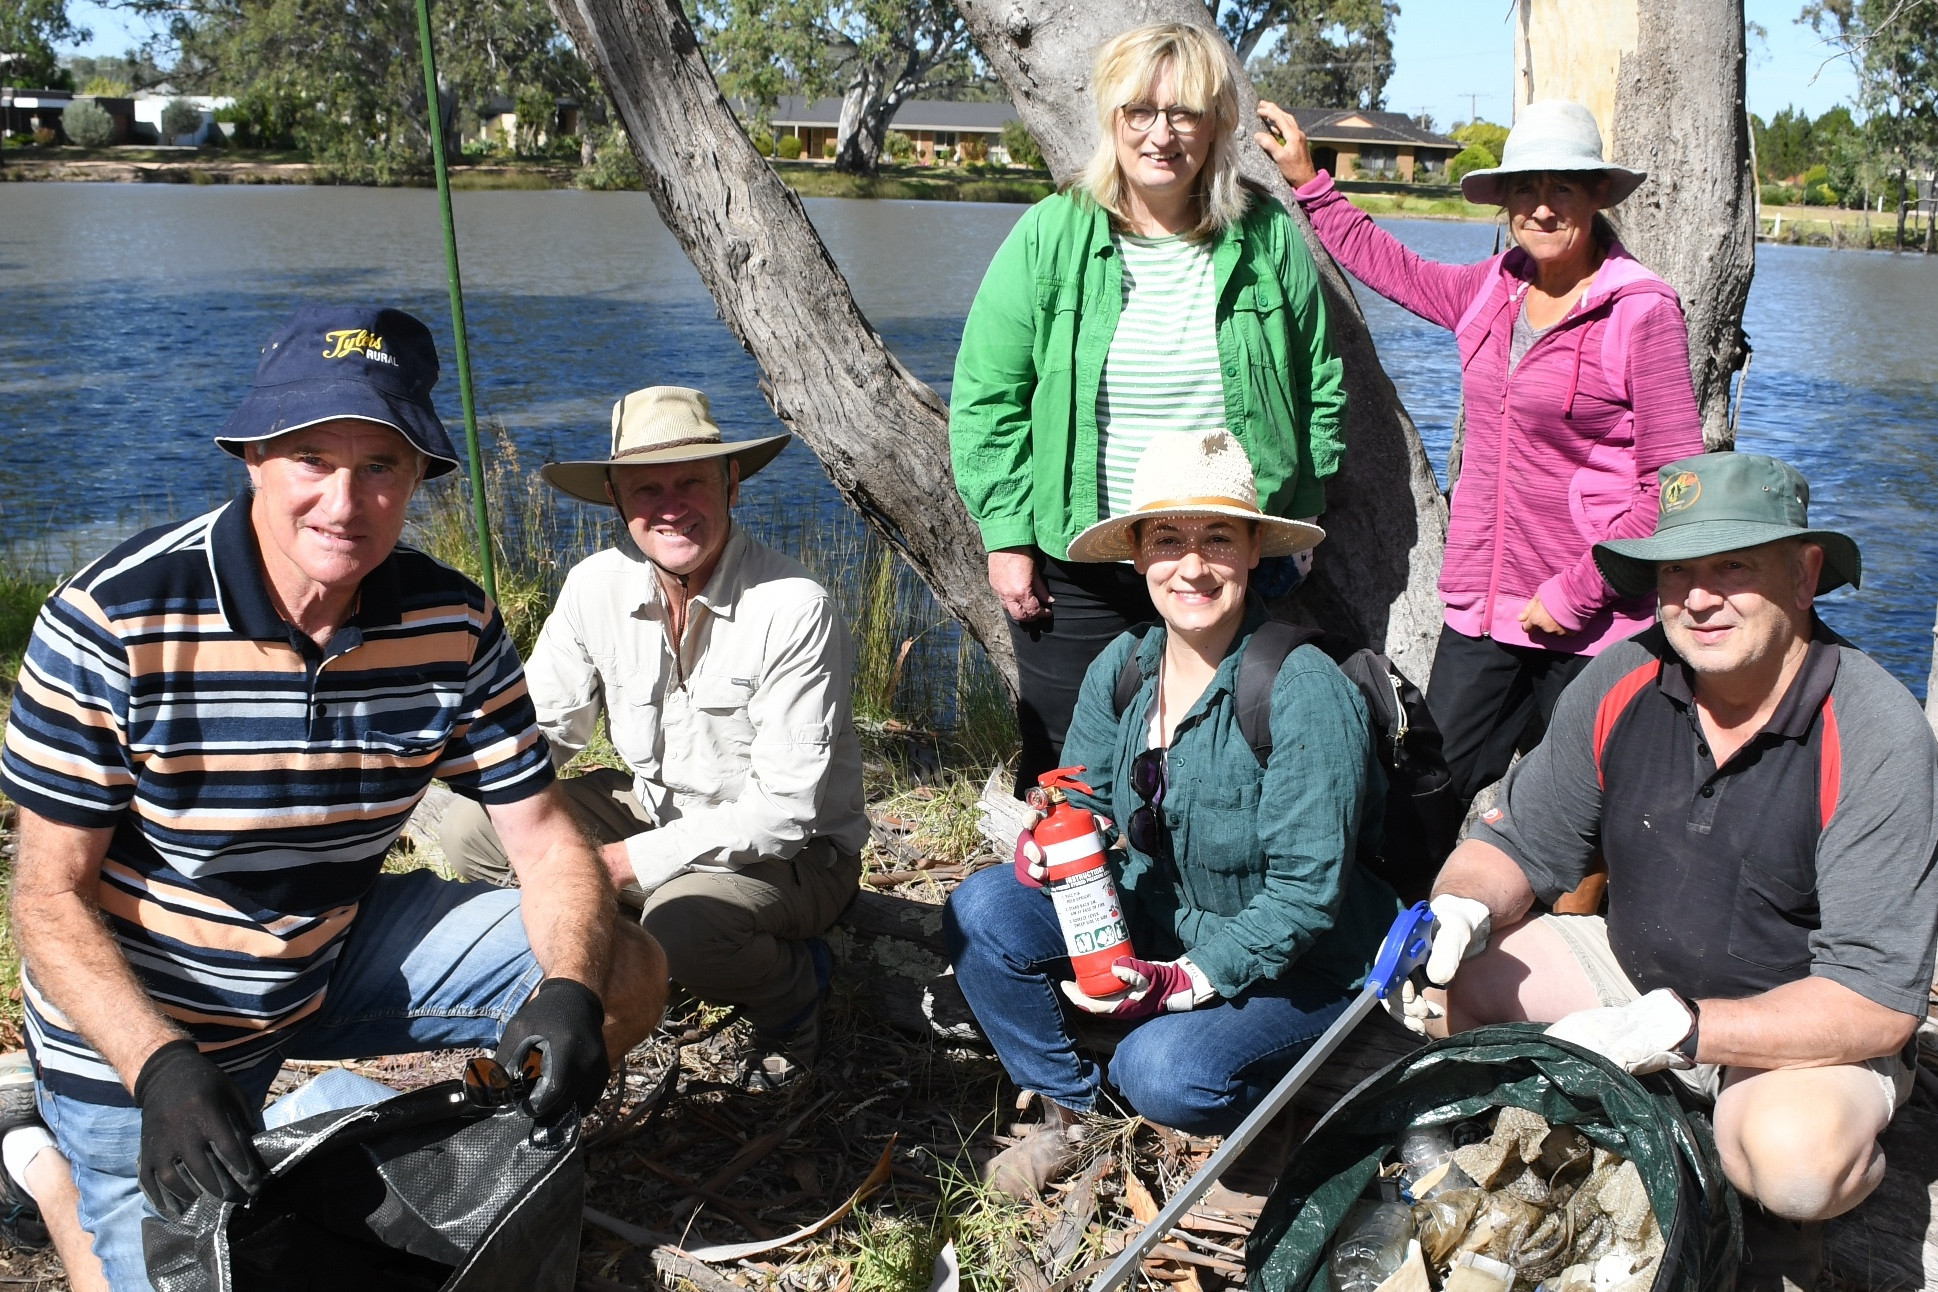 Yarrilinks coordinator Alicia Merriam, is surrounded by helpers Adrian Tyler, Fred Ackland, Lavegne Lehmann, Corrinnee Heinz and Mick Schilling at the bank of the creek.